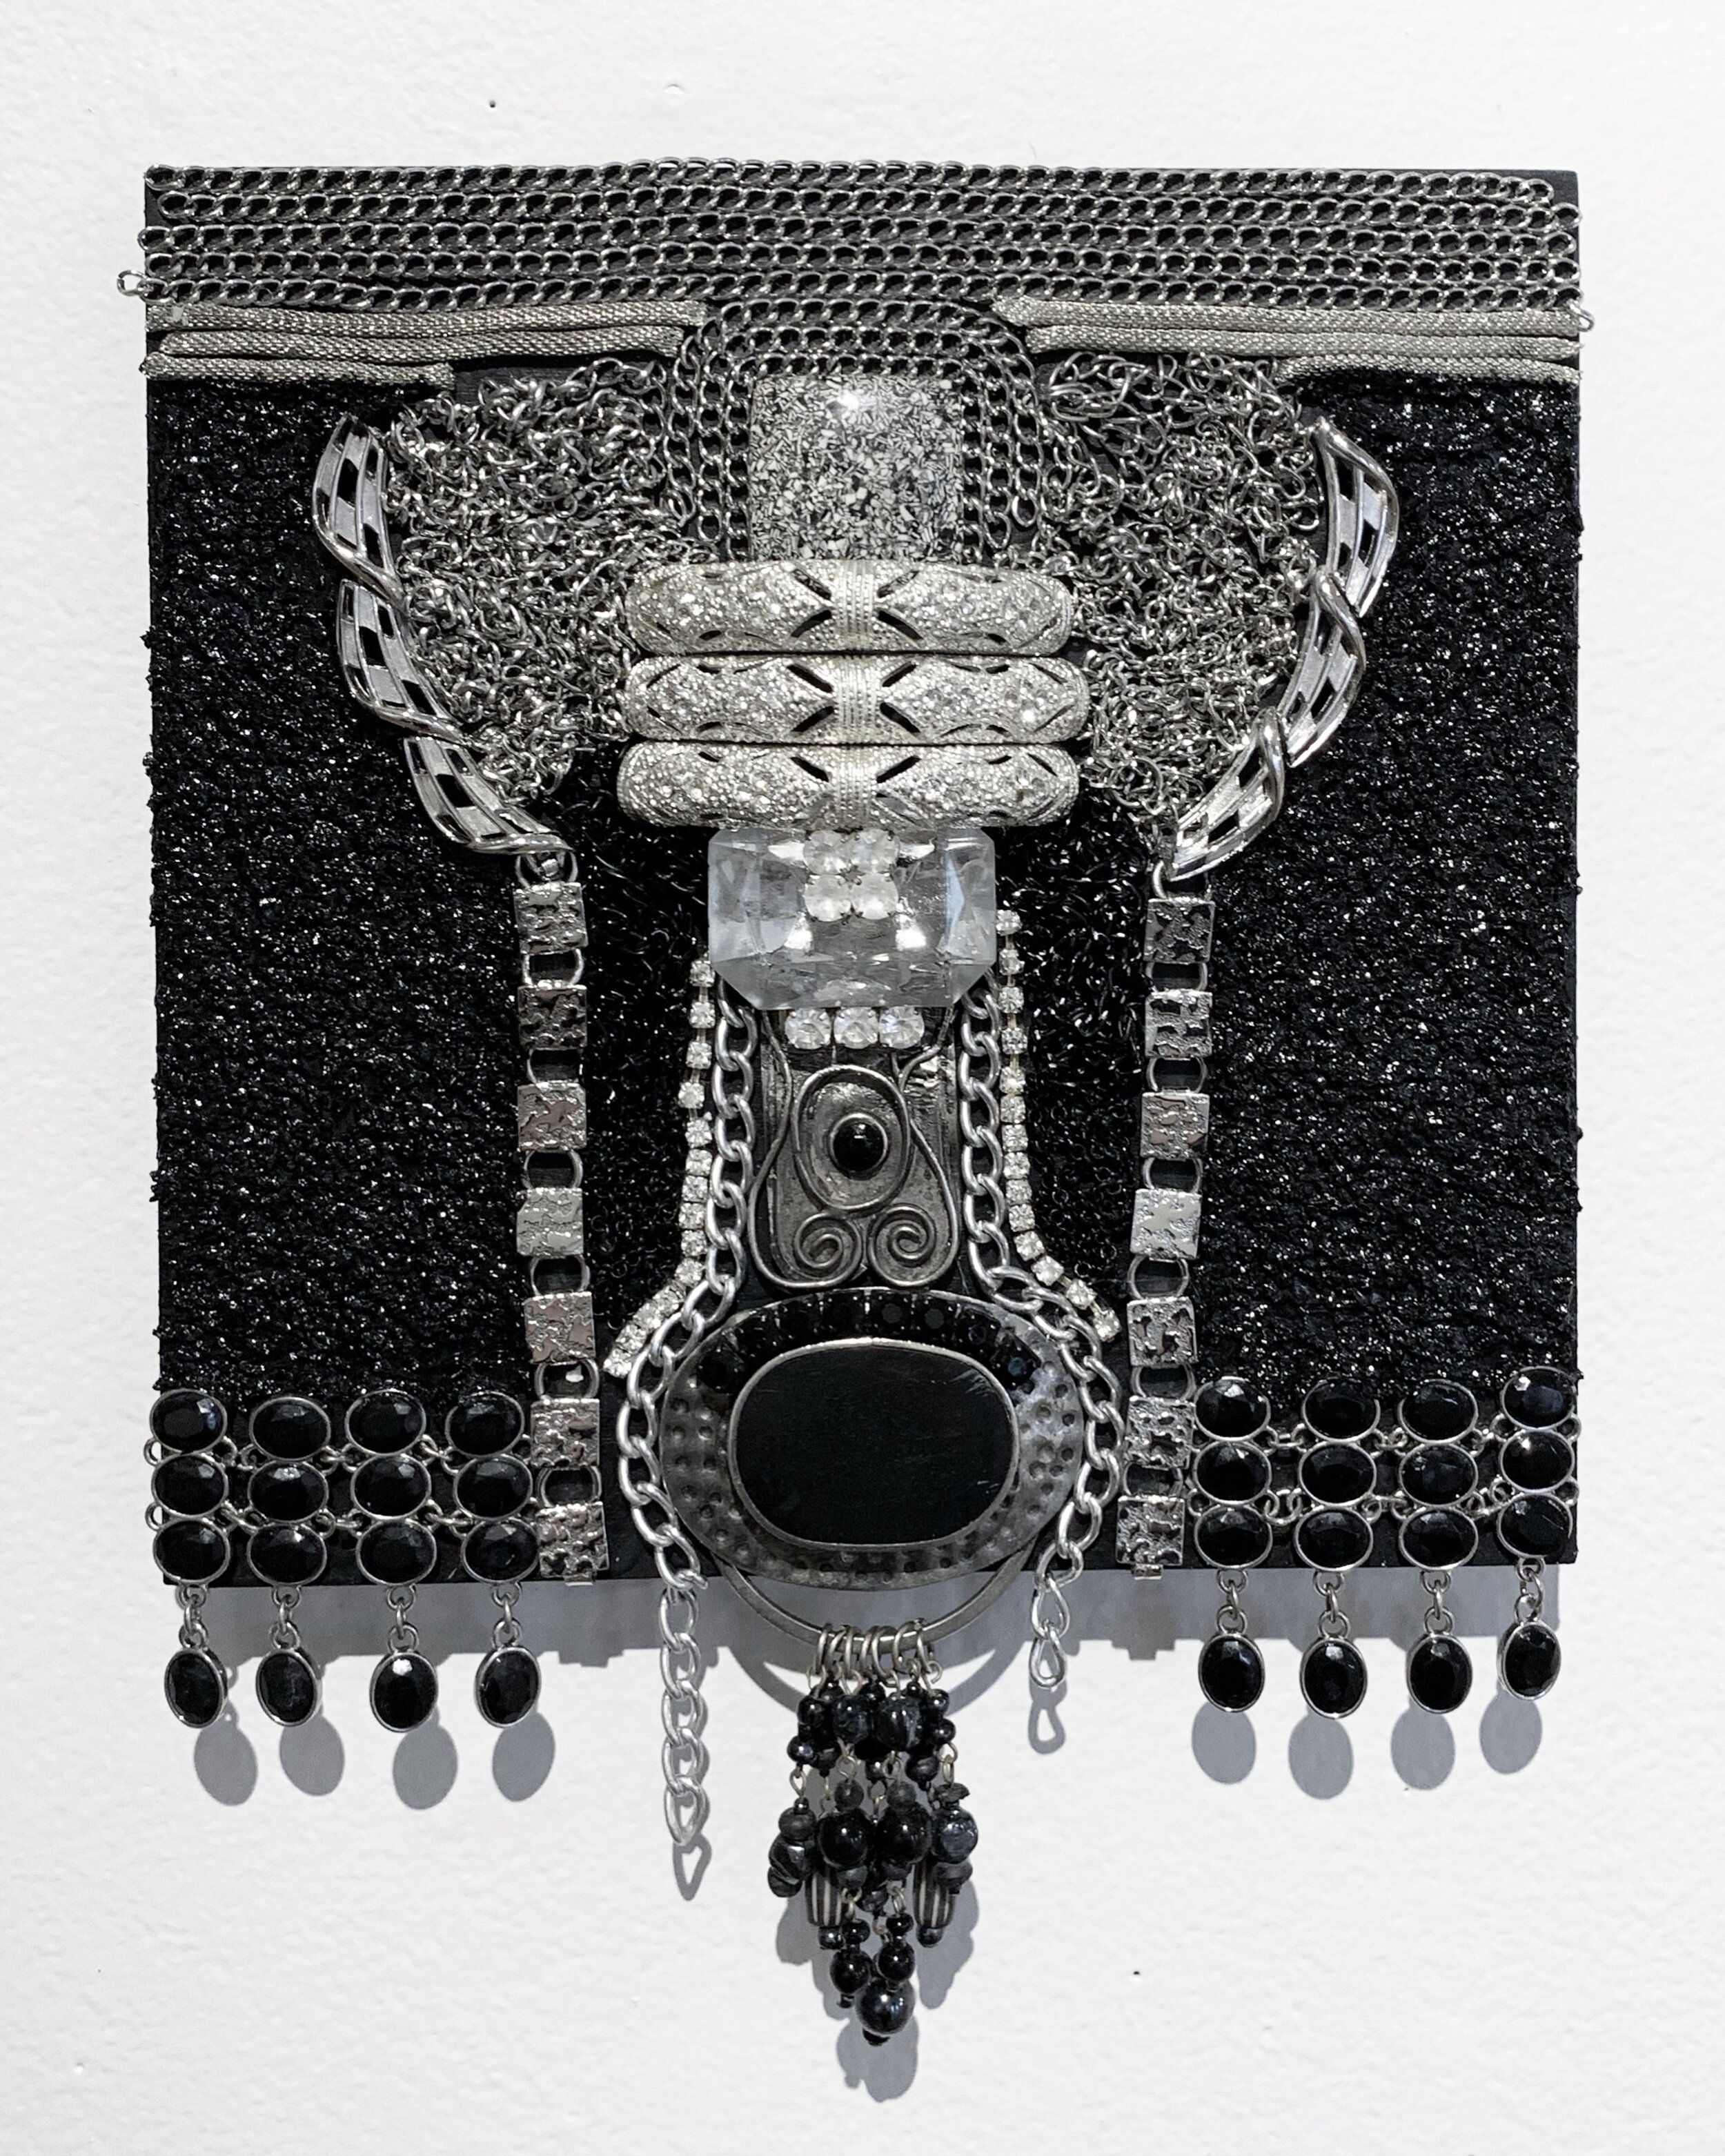   Cadillac,  2020, costume jewelry, silver chain, and glass bead medium on panel, 8x8” 